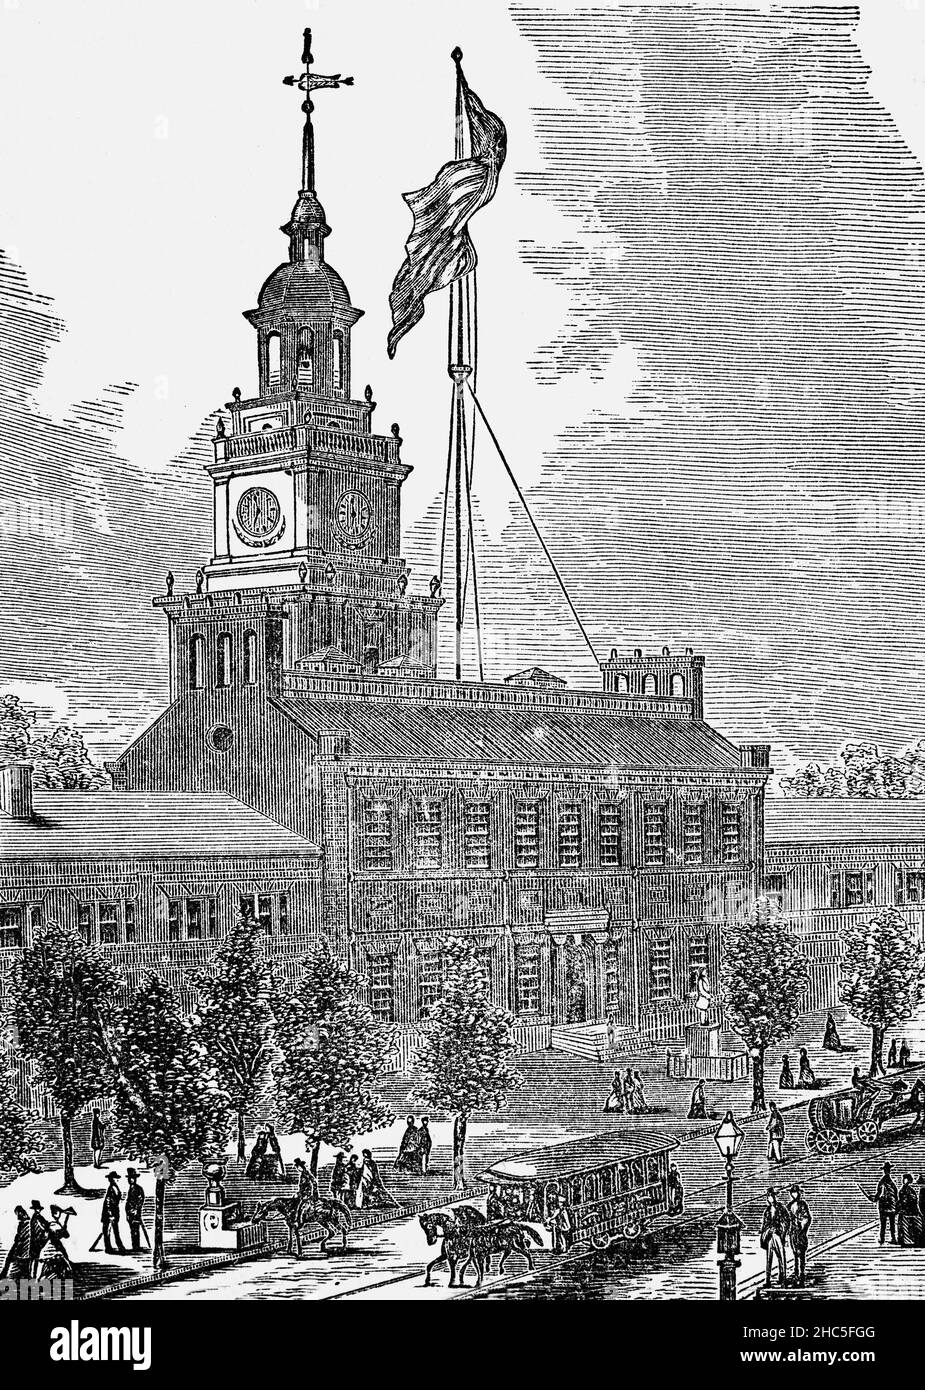 A late 19th Century illustration of Independence Hall, a historic civic building in Philadelphia, Pennsylvania in which both the United States Declaration of Independence and the United States Constitution were debated and adopted by America's Founding Fathers. The building was completed in 1753 as the Pennsylvania State House, and served as the capitol for the Province and Commonwealth of Pennsylvania, later becoming the principal meeting place of the Second Continental Congress from 1775 to 1783 and the site of the Constitutional Convention in the summer of 1787. Stock Photo